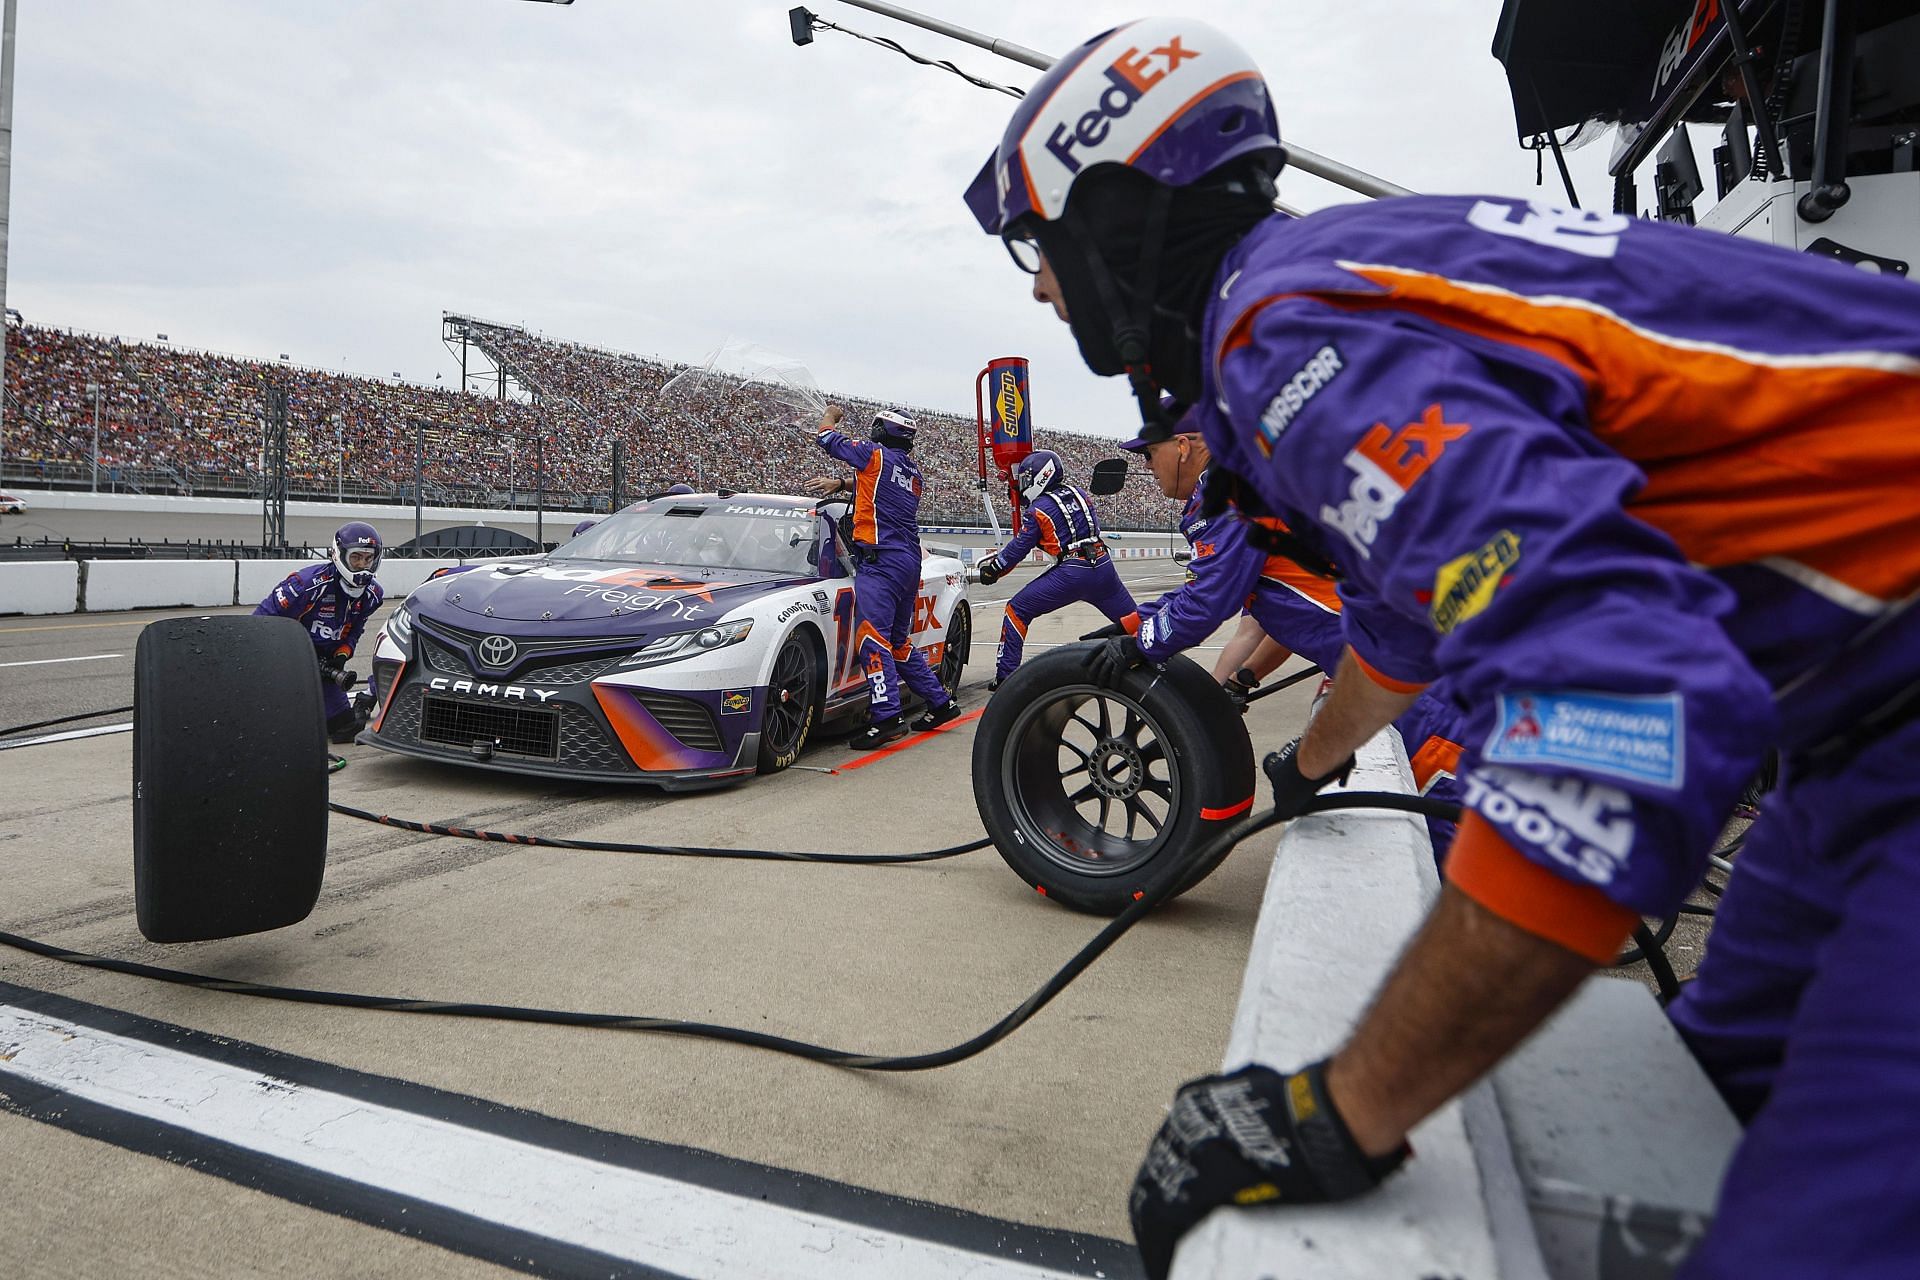 Denny Hamlin pits during the 2022 NASCAR Cup Series FireKeepers Casino 400 at Michigan International Speedway in Brooklyn, Michigan (Photo by Sean Gardner/Getty Images)